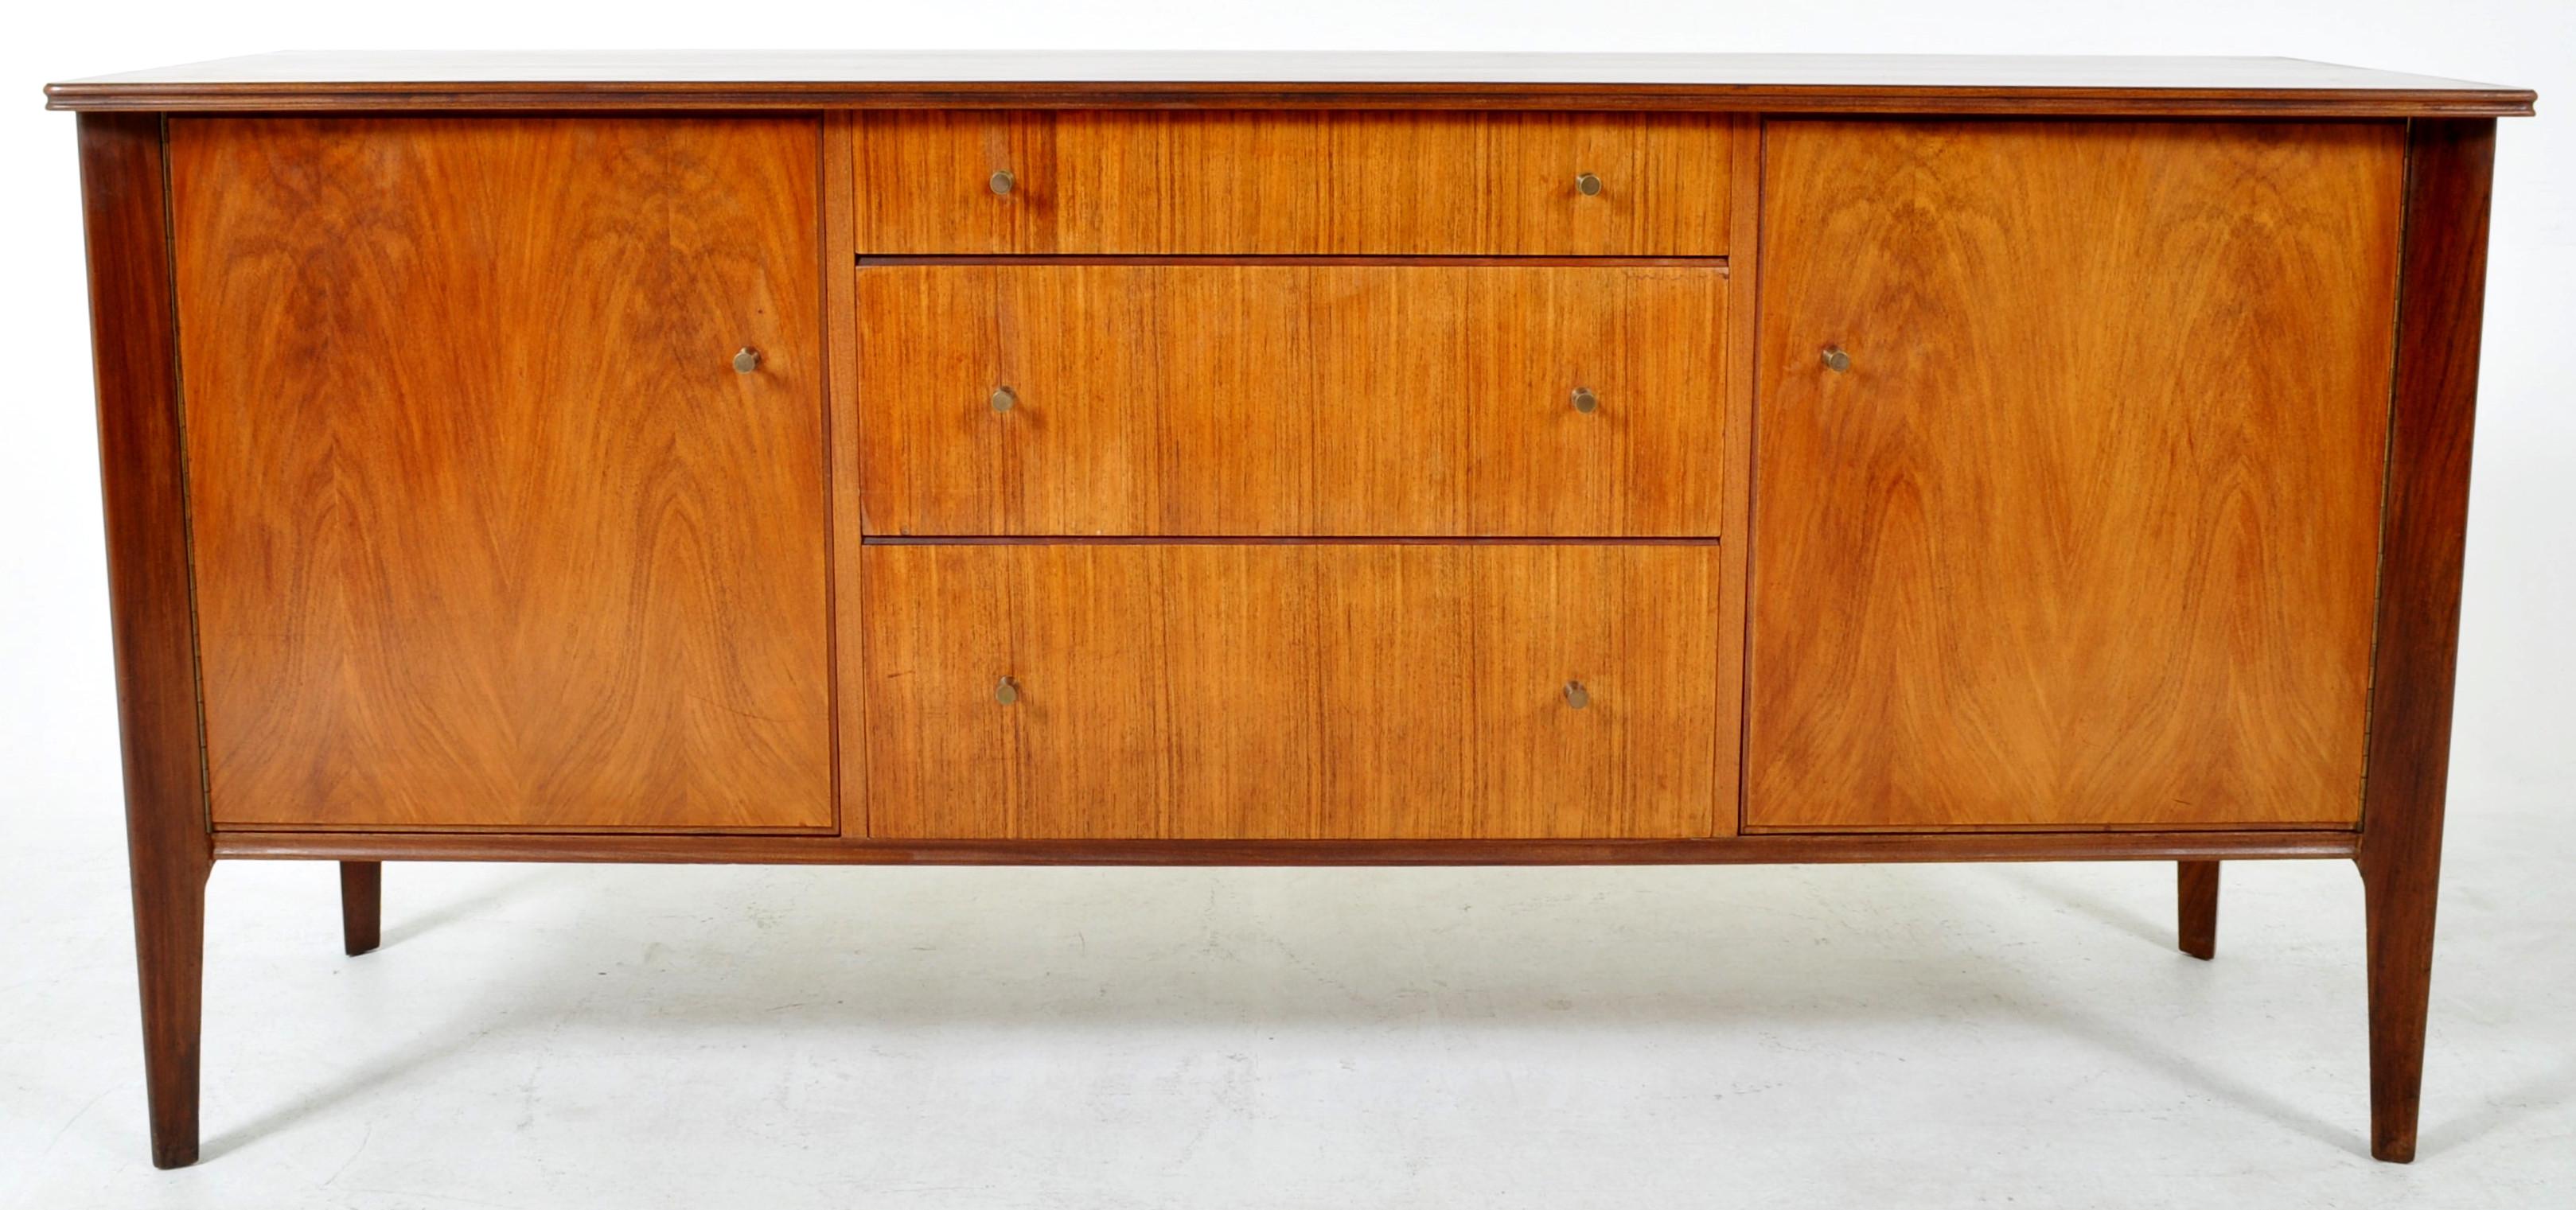 Original Mid-Century Modern (MCM) Danish Teak Credenza by A. Younger Ltd, 1960s. The credenza having a central bank of graduated drawers with original bronze pulls and flanked to either side by a cupboard enclosing a single shelf. The credenza